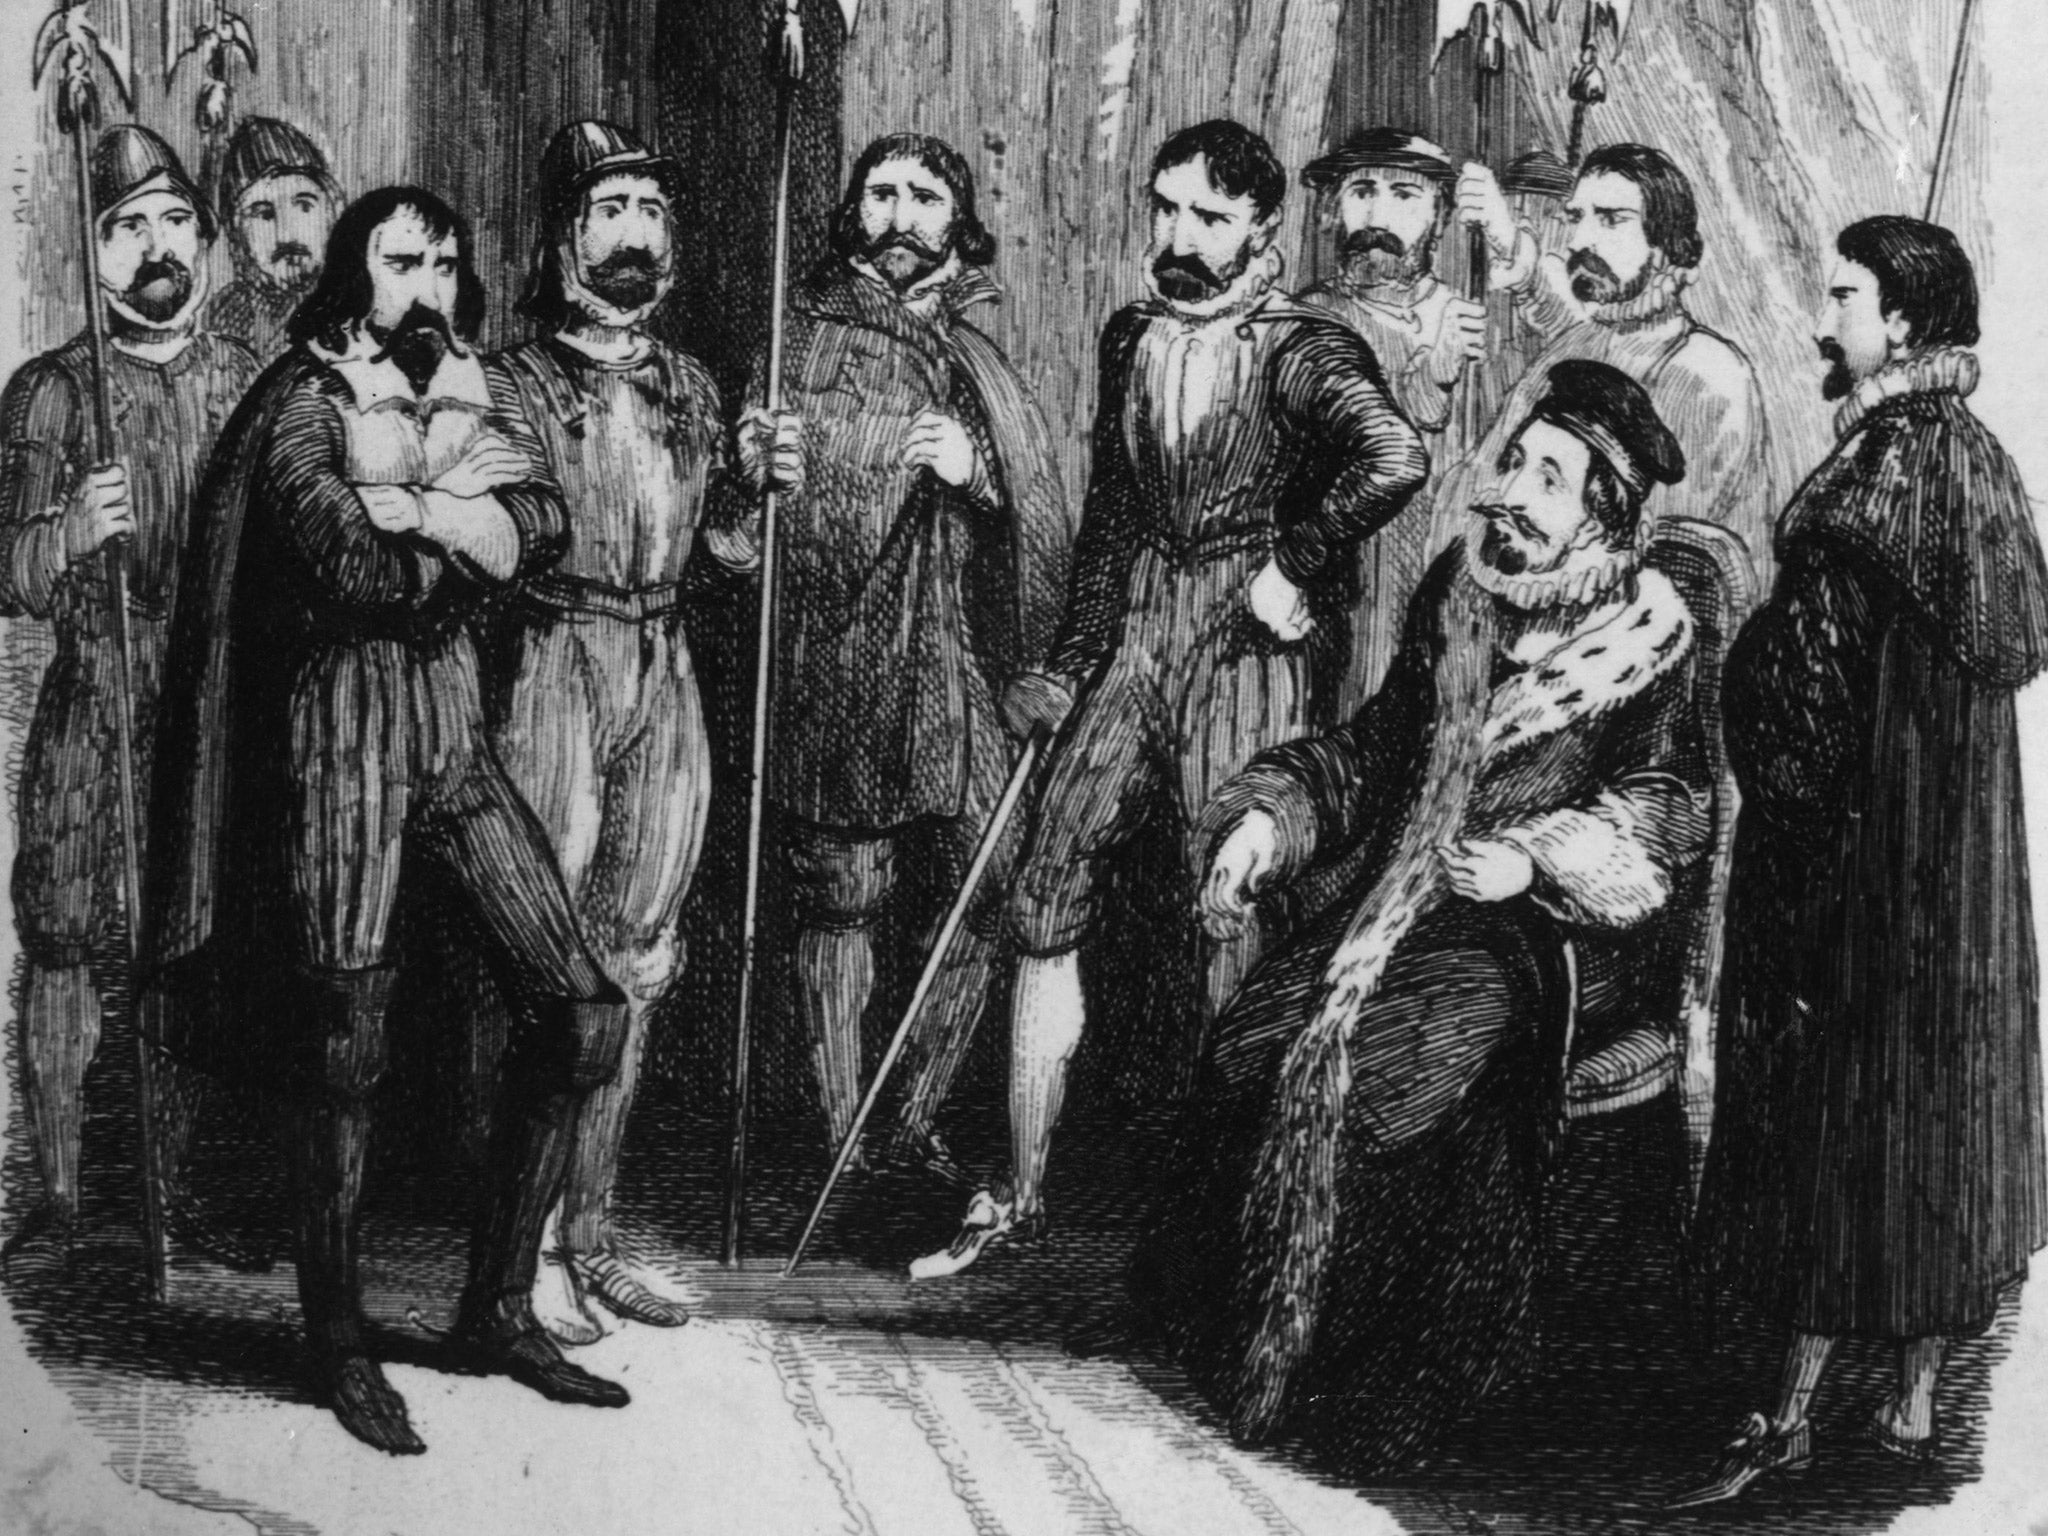 English conspirator Guy Fawkes is interrogated by King James I after his arrest for planning to blow up the House of Lords